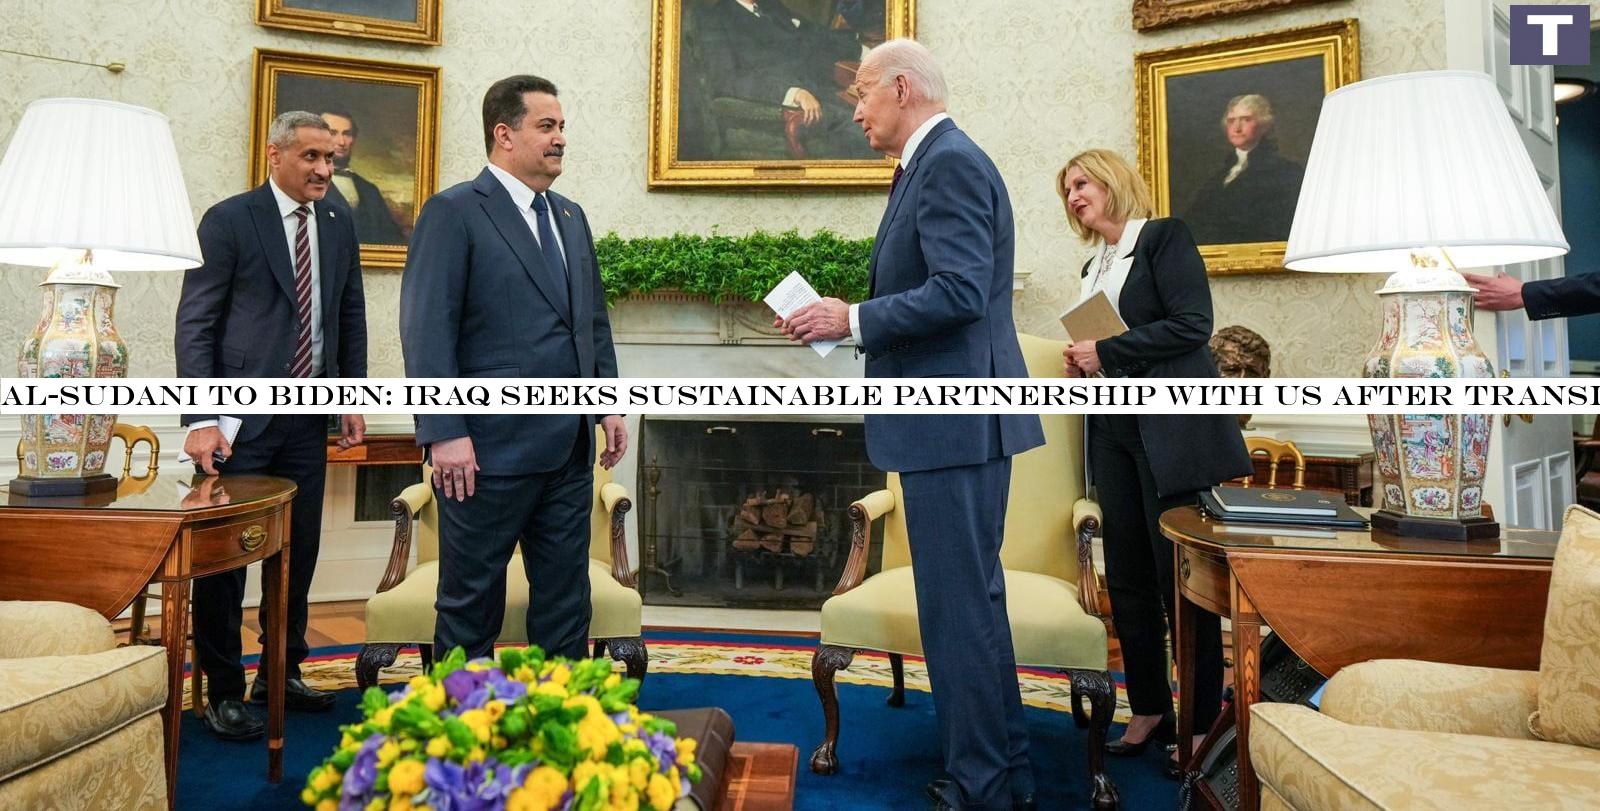 Al-Sudani to Biden: Iraq seeks sustainable partnership with US after transition from military ties